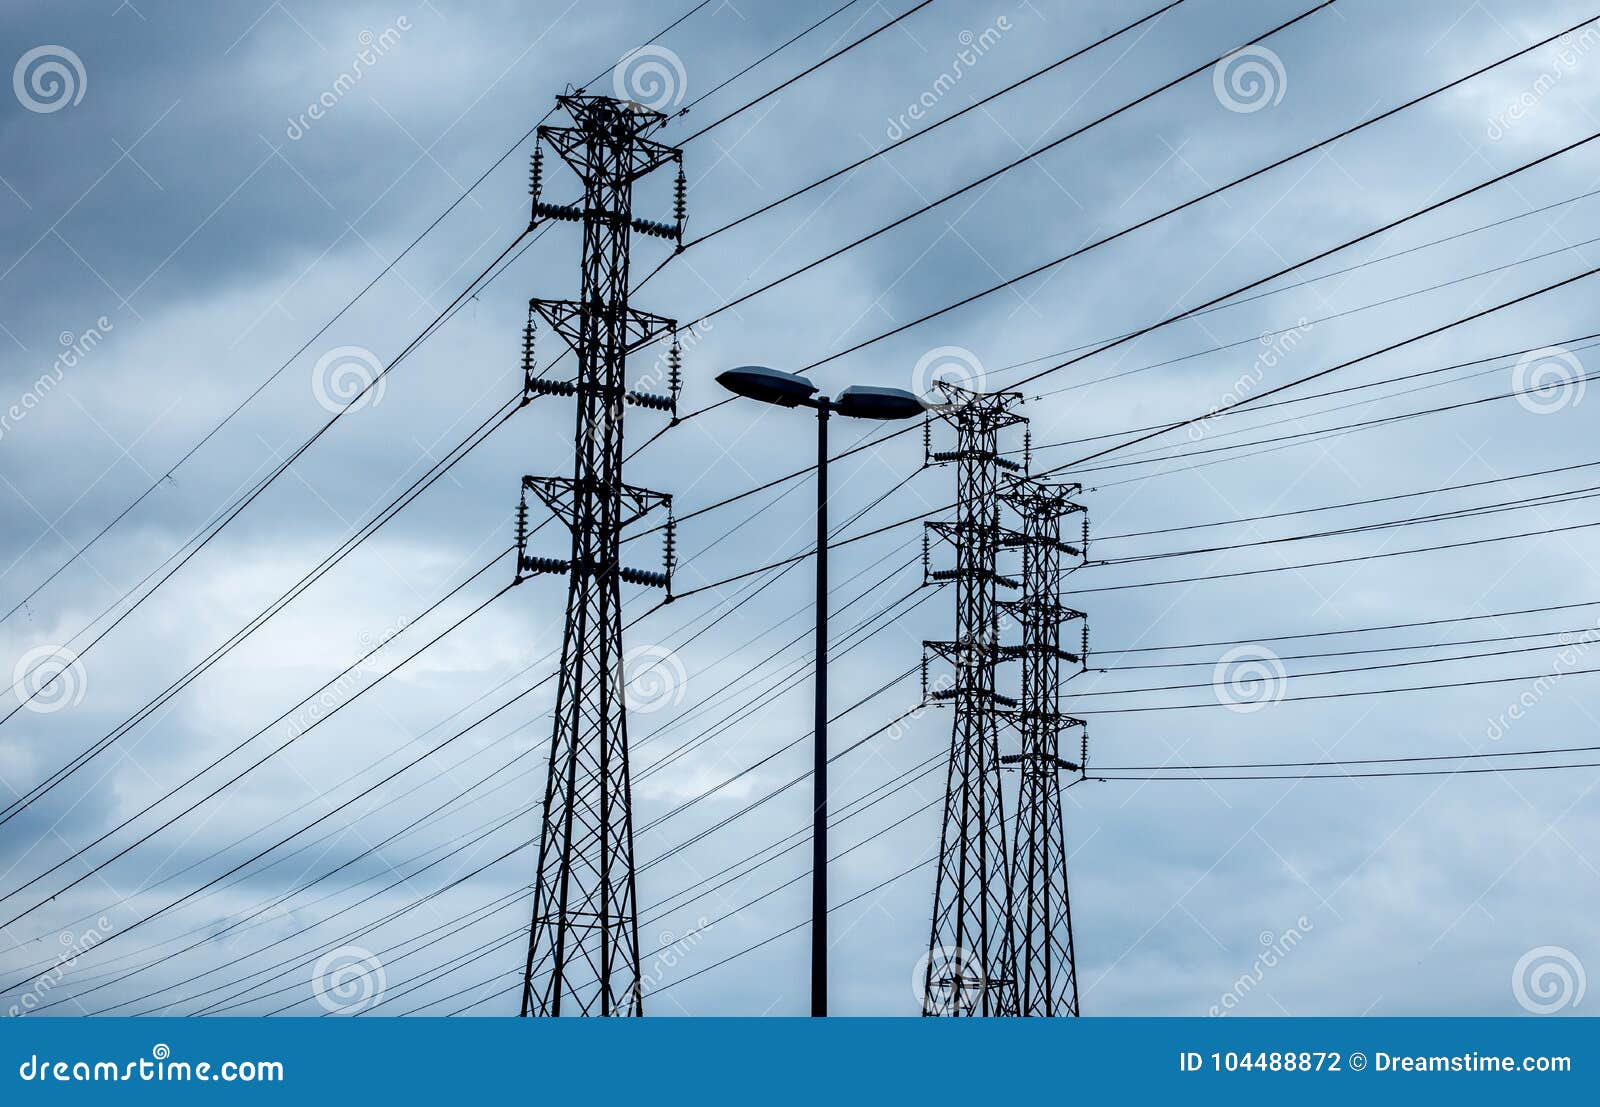 electricity towers in cloudy weather